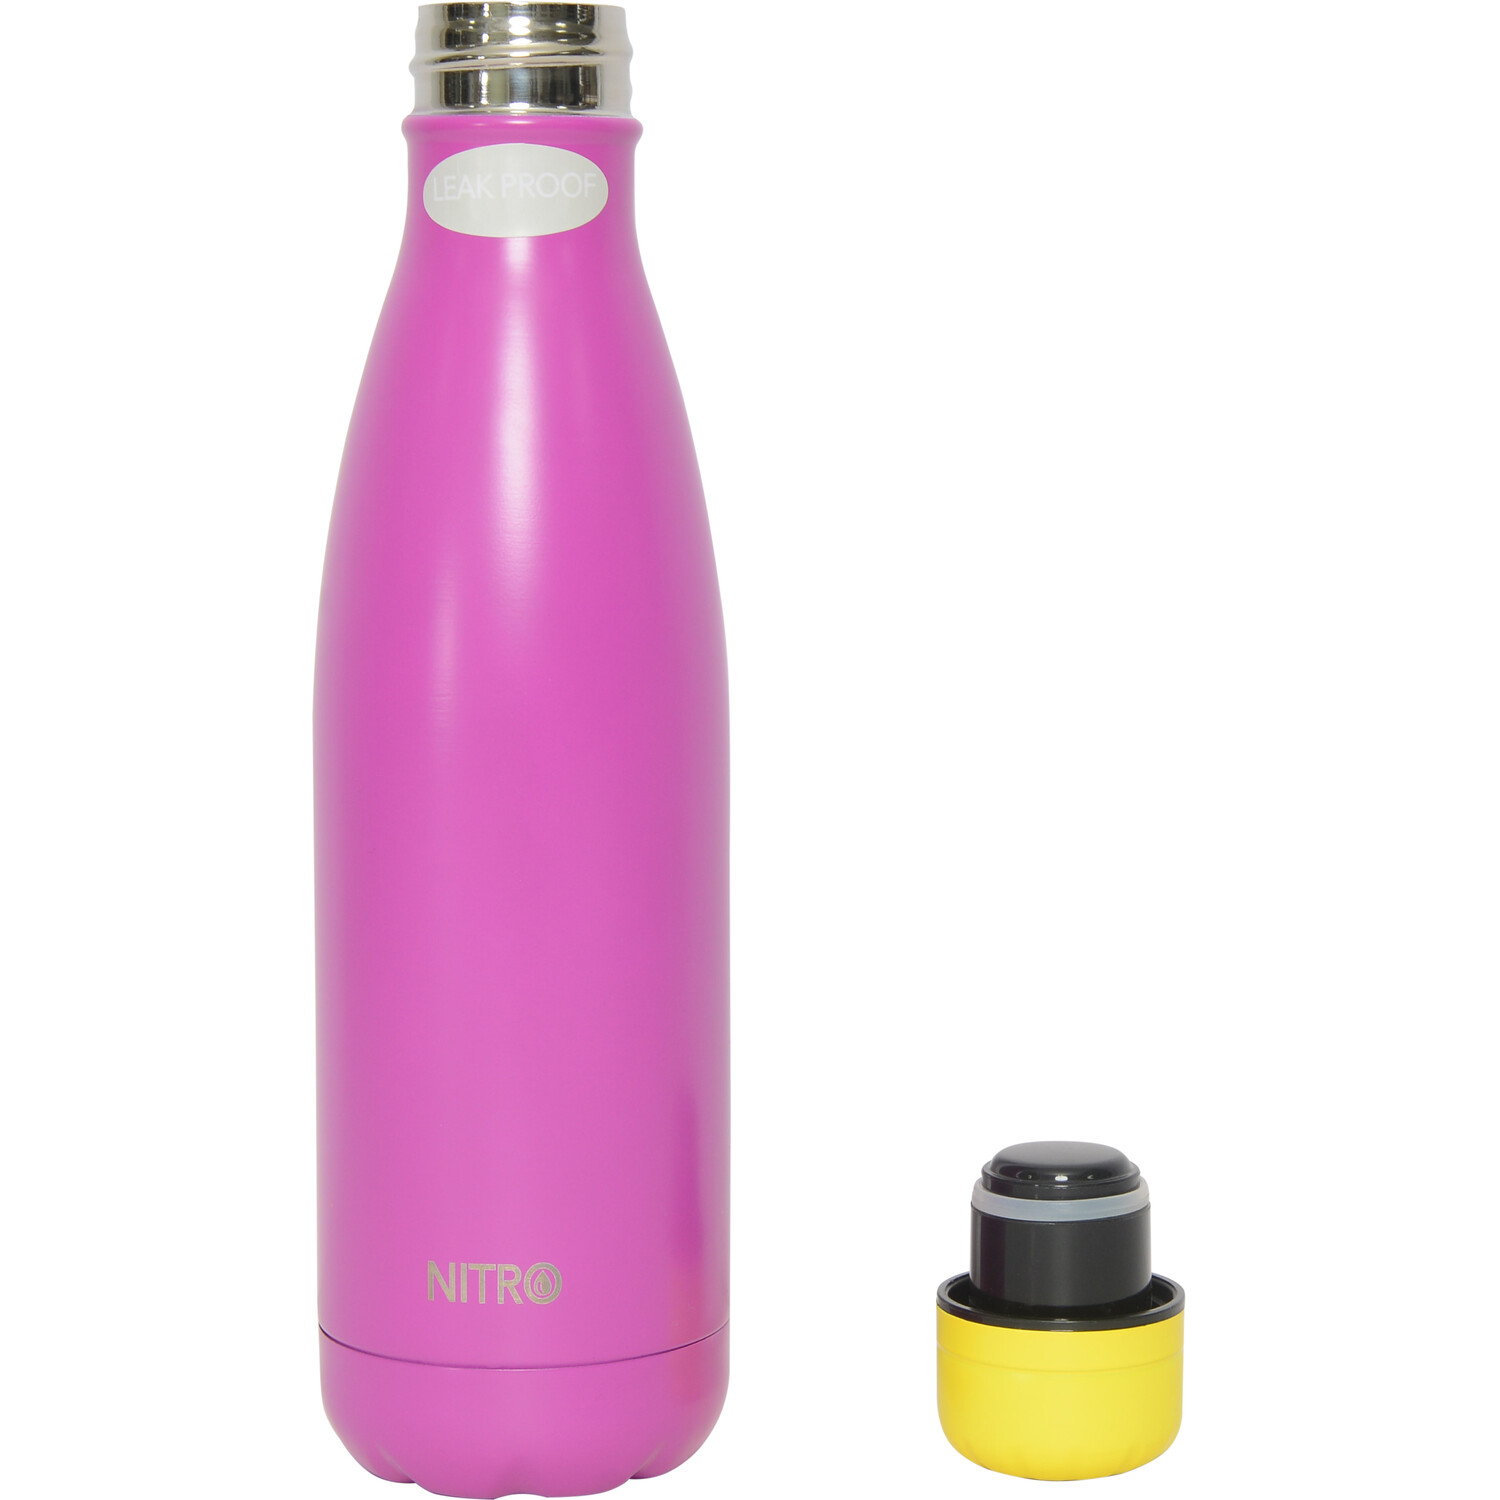 Nitro Neon Pink/Coral Stainless Steel Bottle Image 2